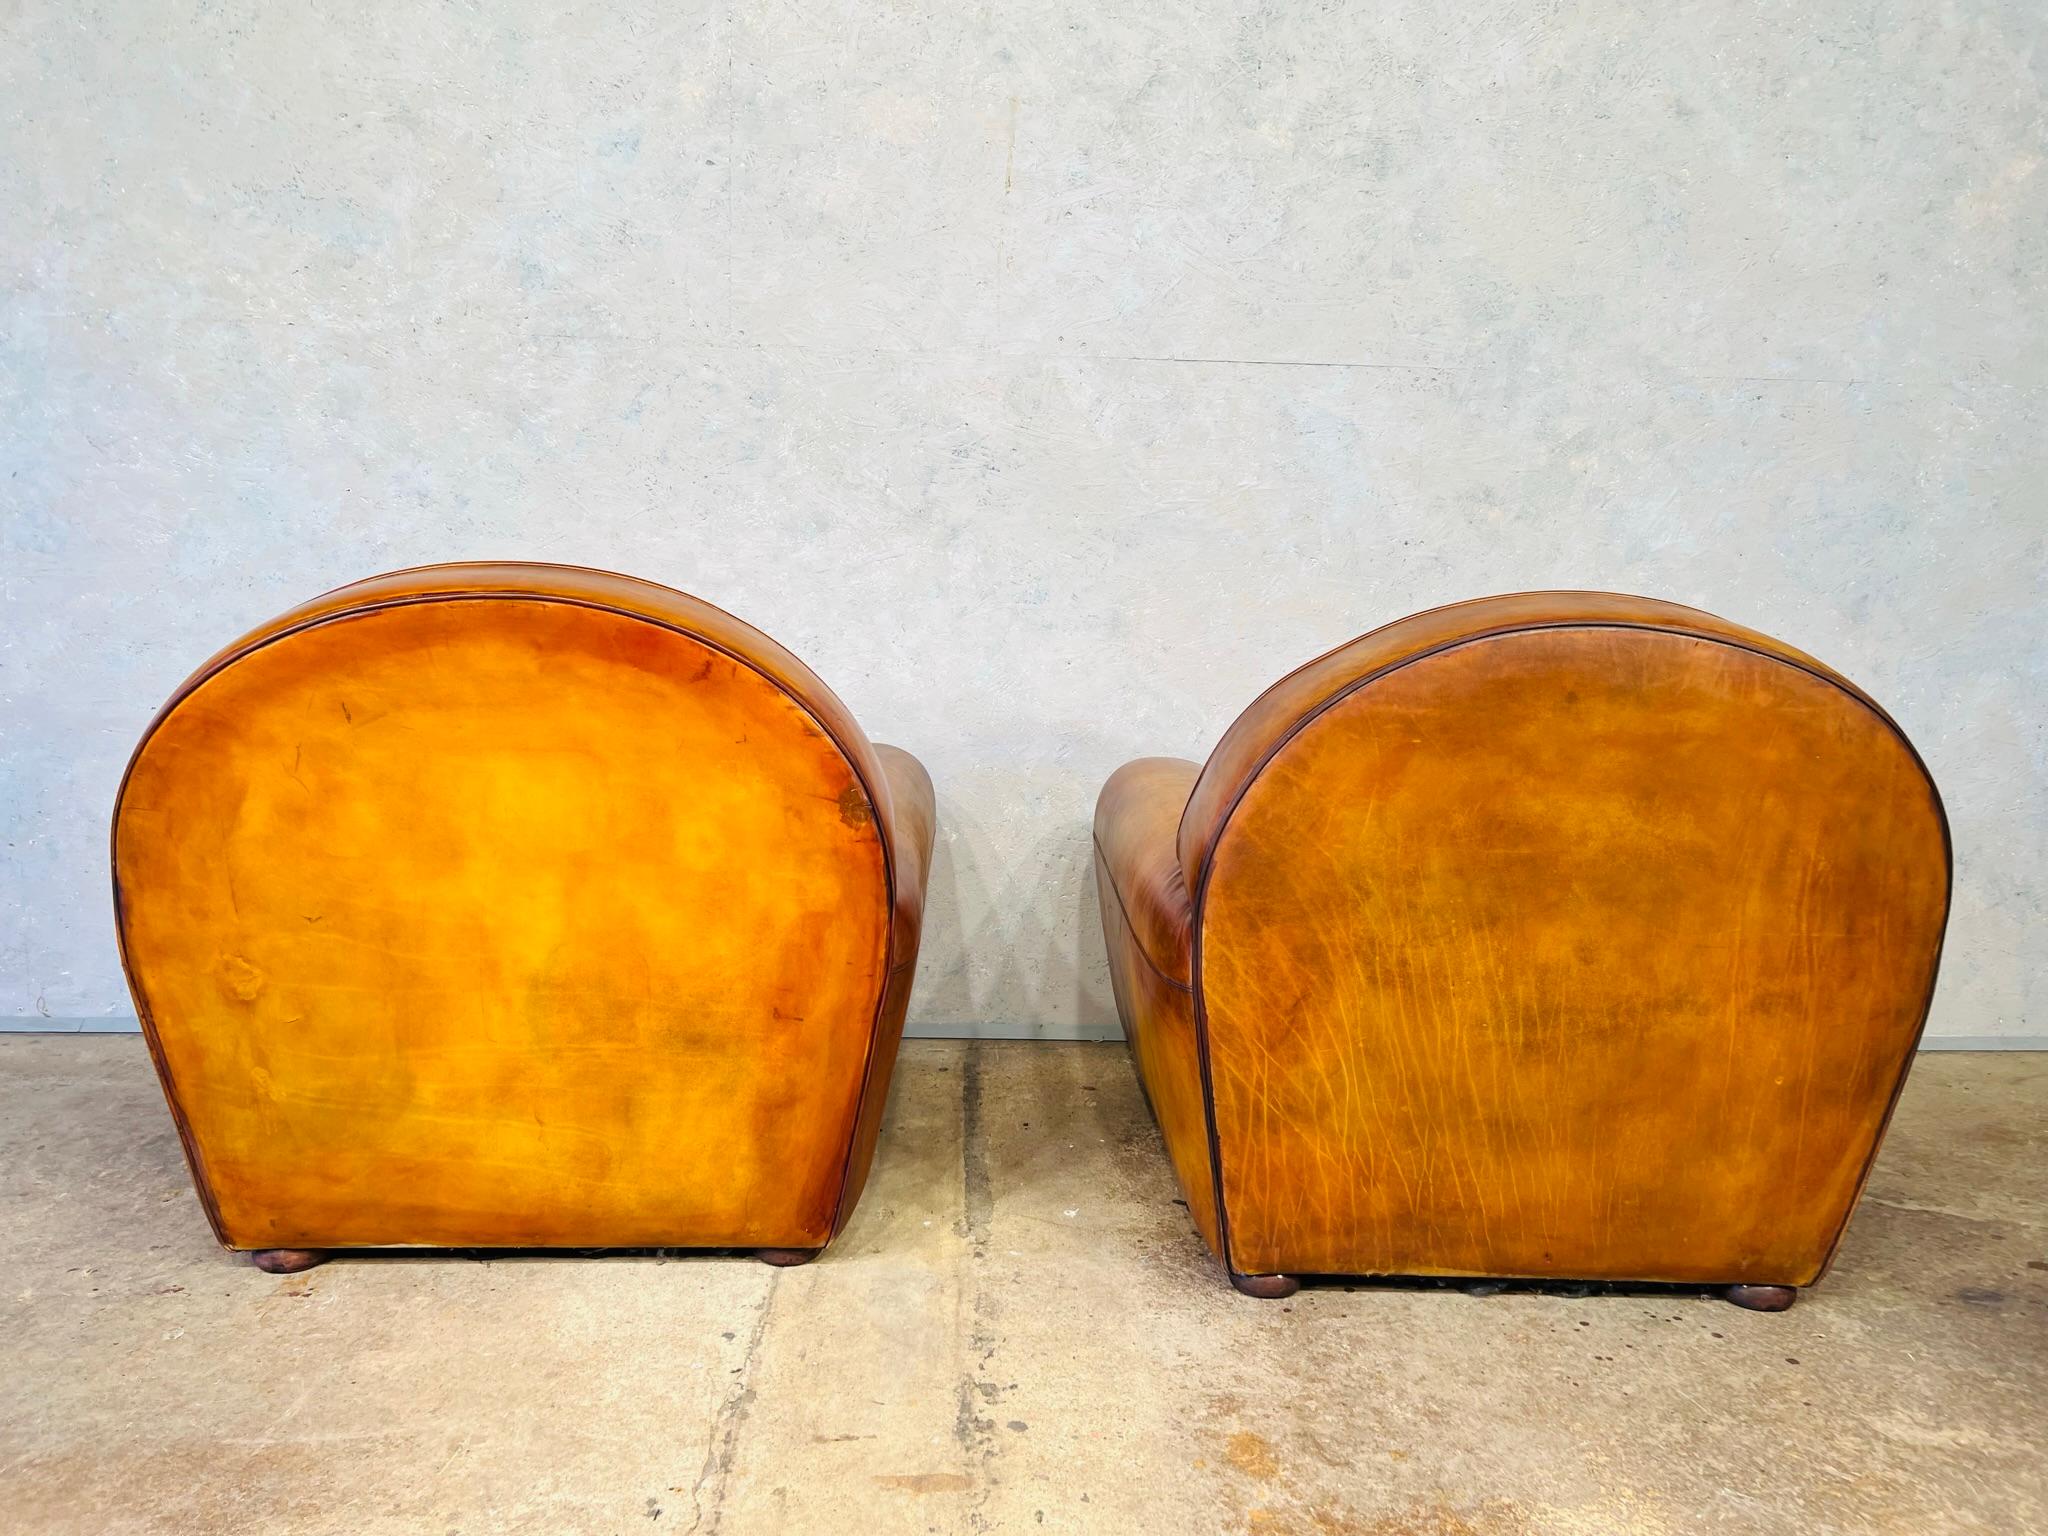 Huge Pair of Art Deco Leather Club Chairs Armchairs and Foot Stool 1940s #668 5